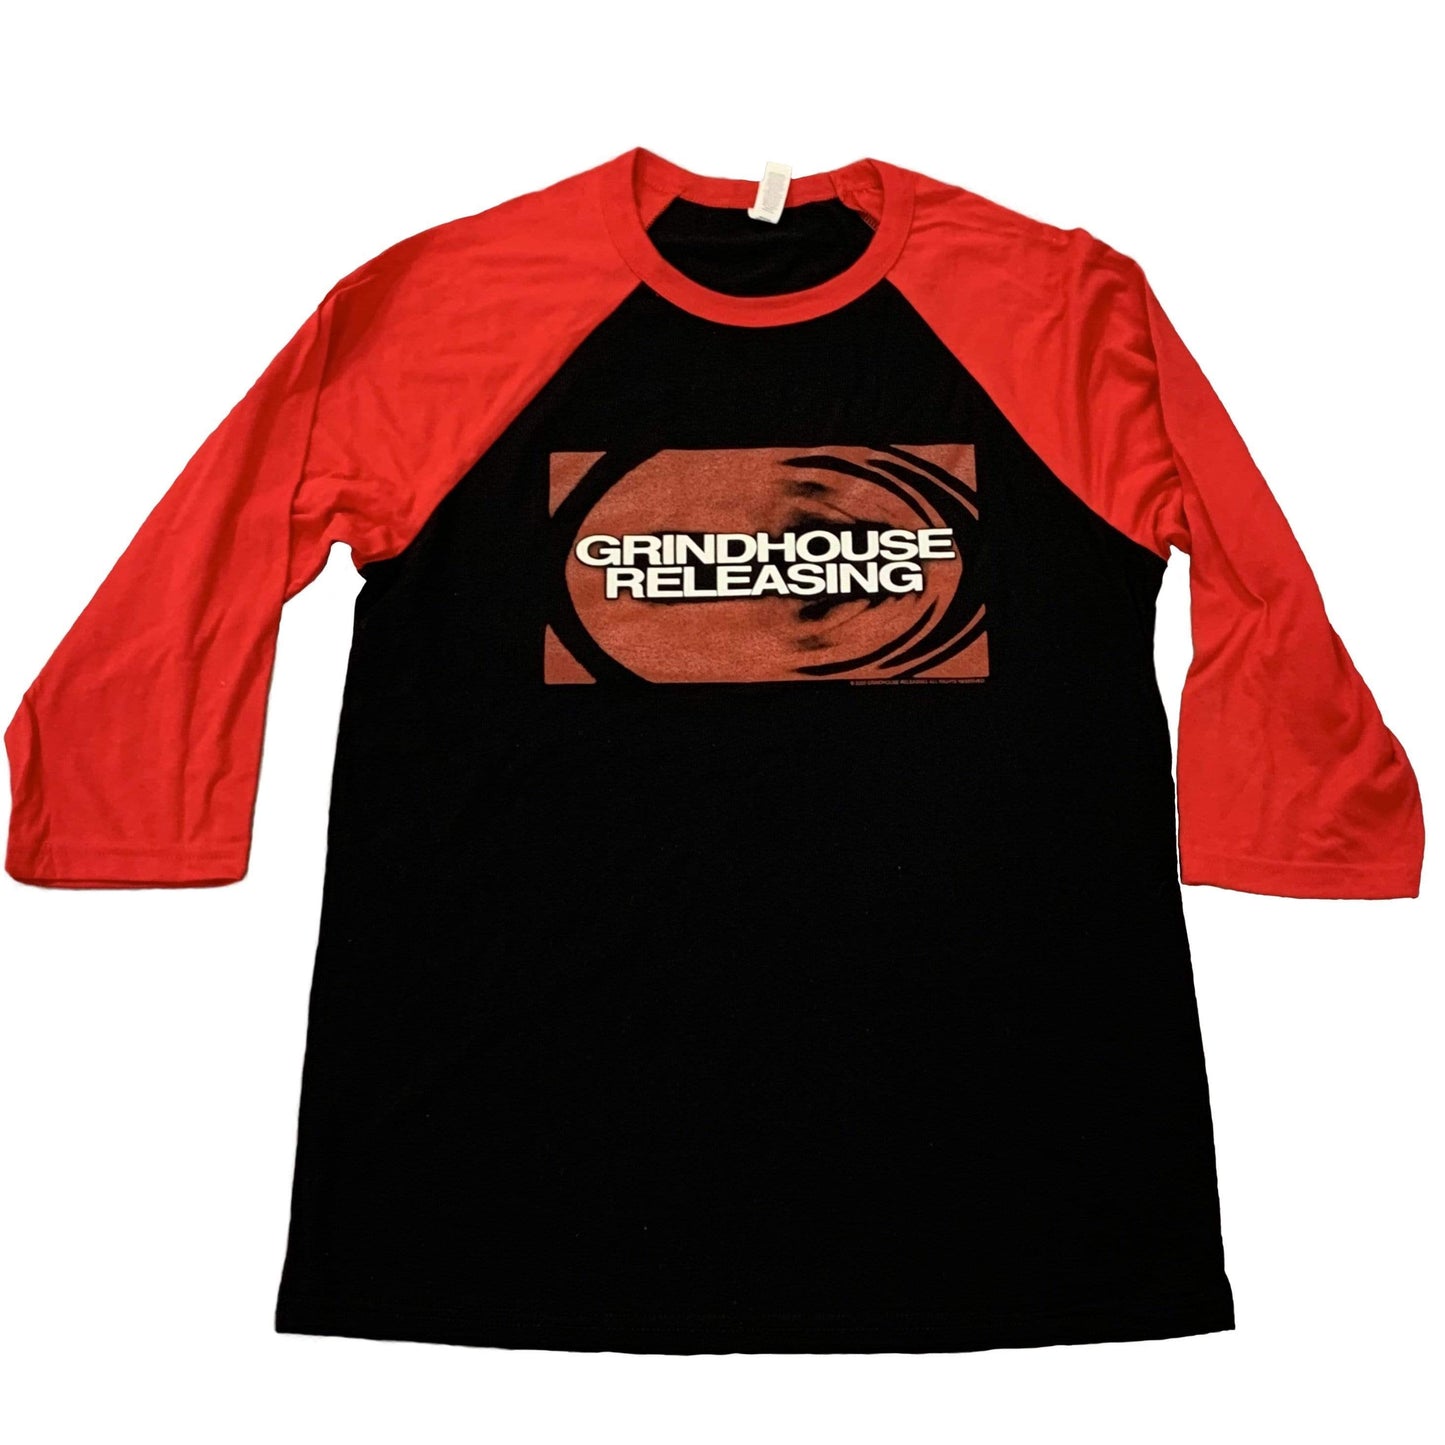 GRINDHOUSE RELEASING 3/4 Sleeve Shirt